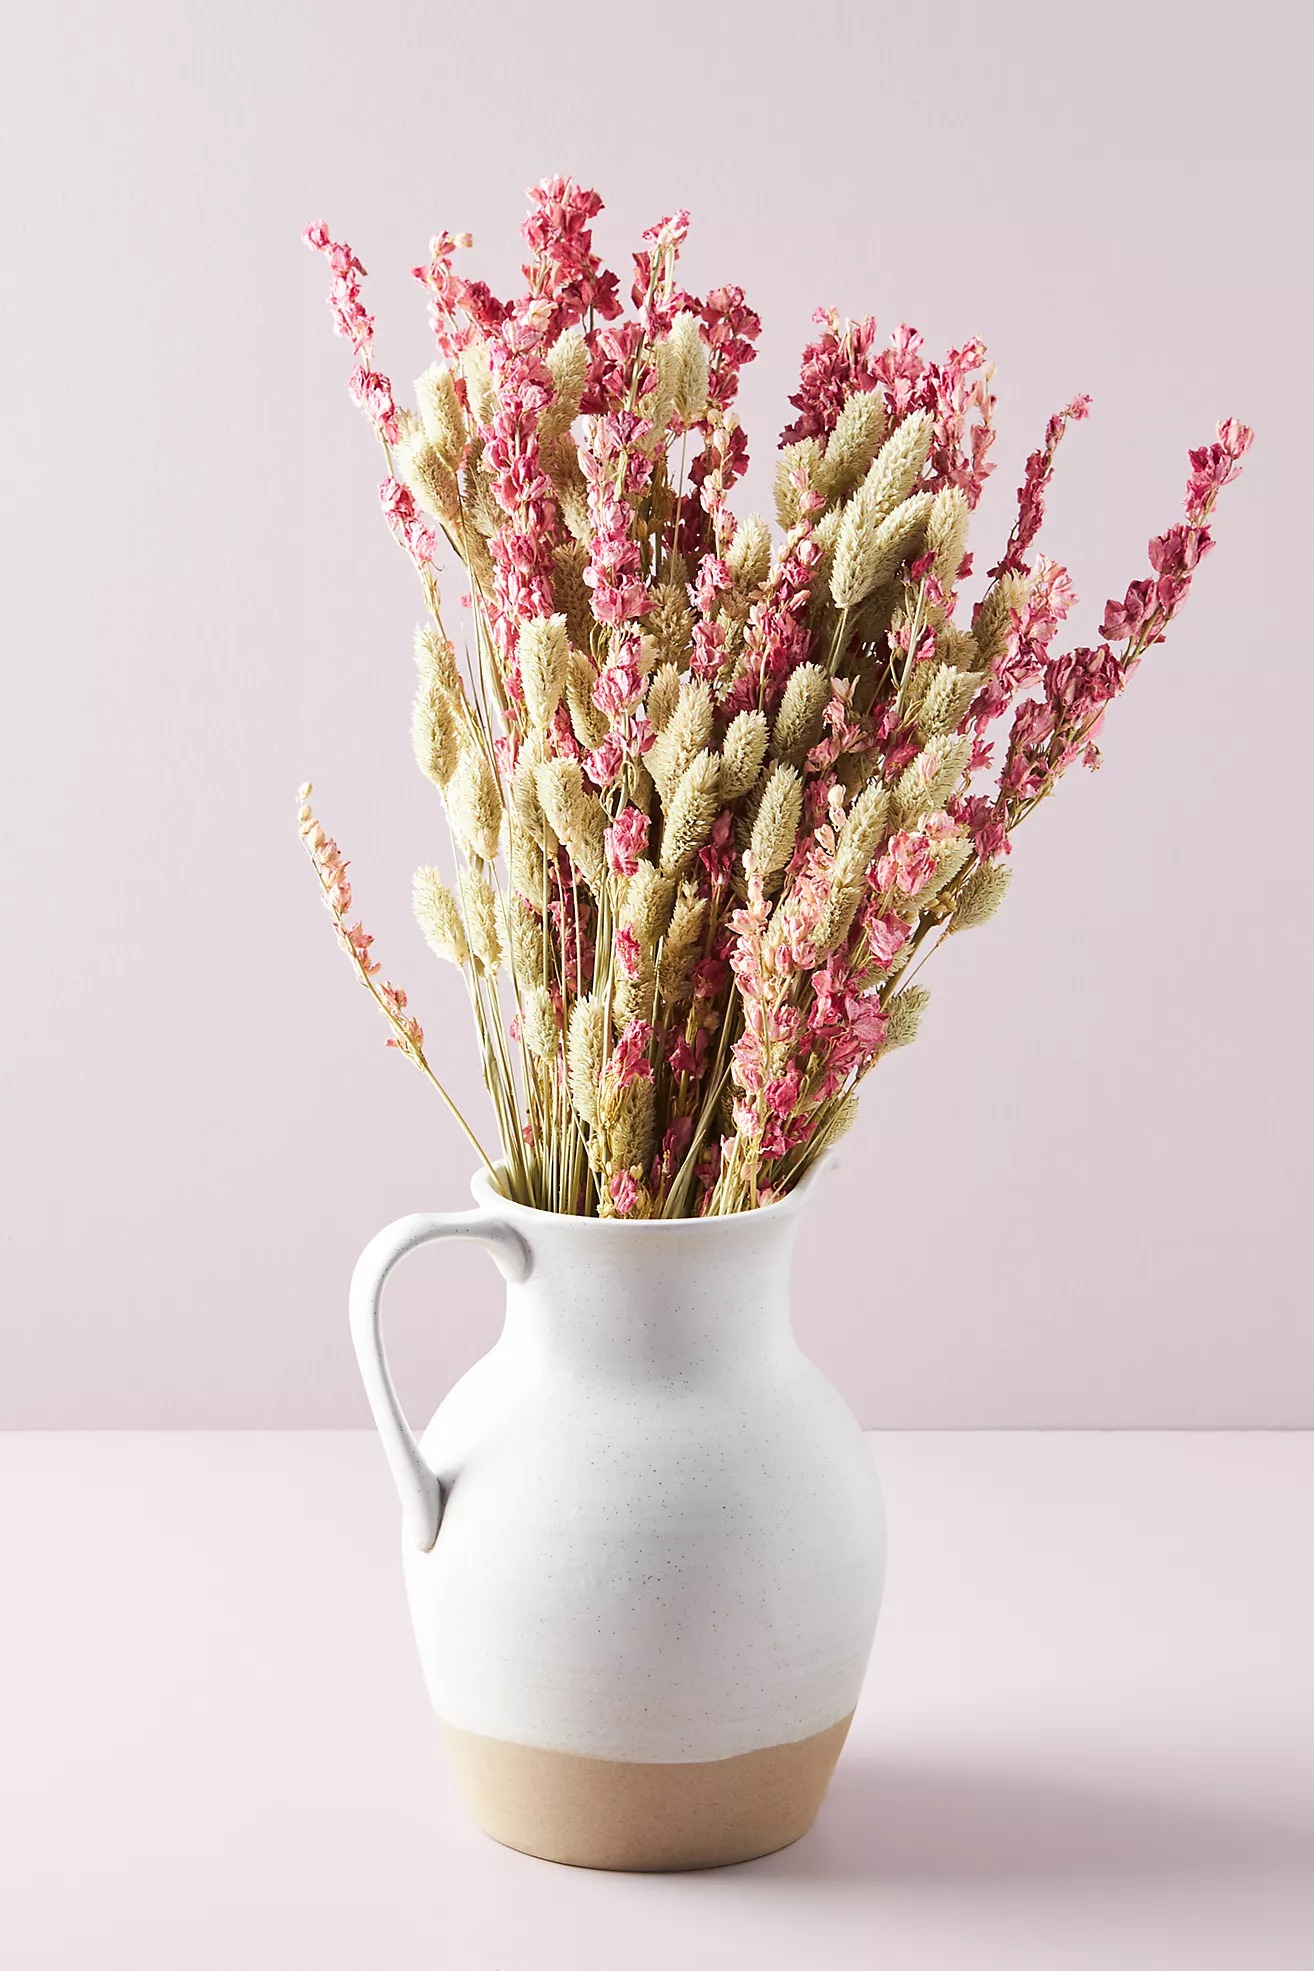 neutral tone blush dried and preserved phalaris and delphinium dried flower bouquet from Anthropologie online